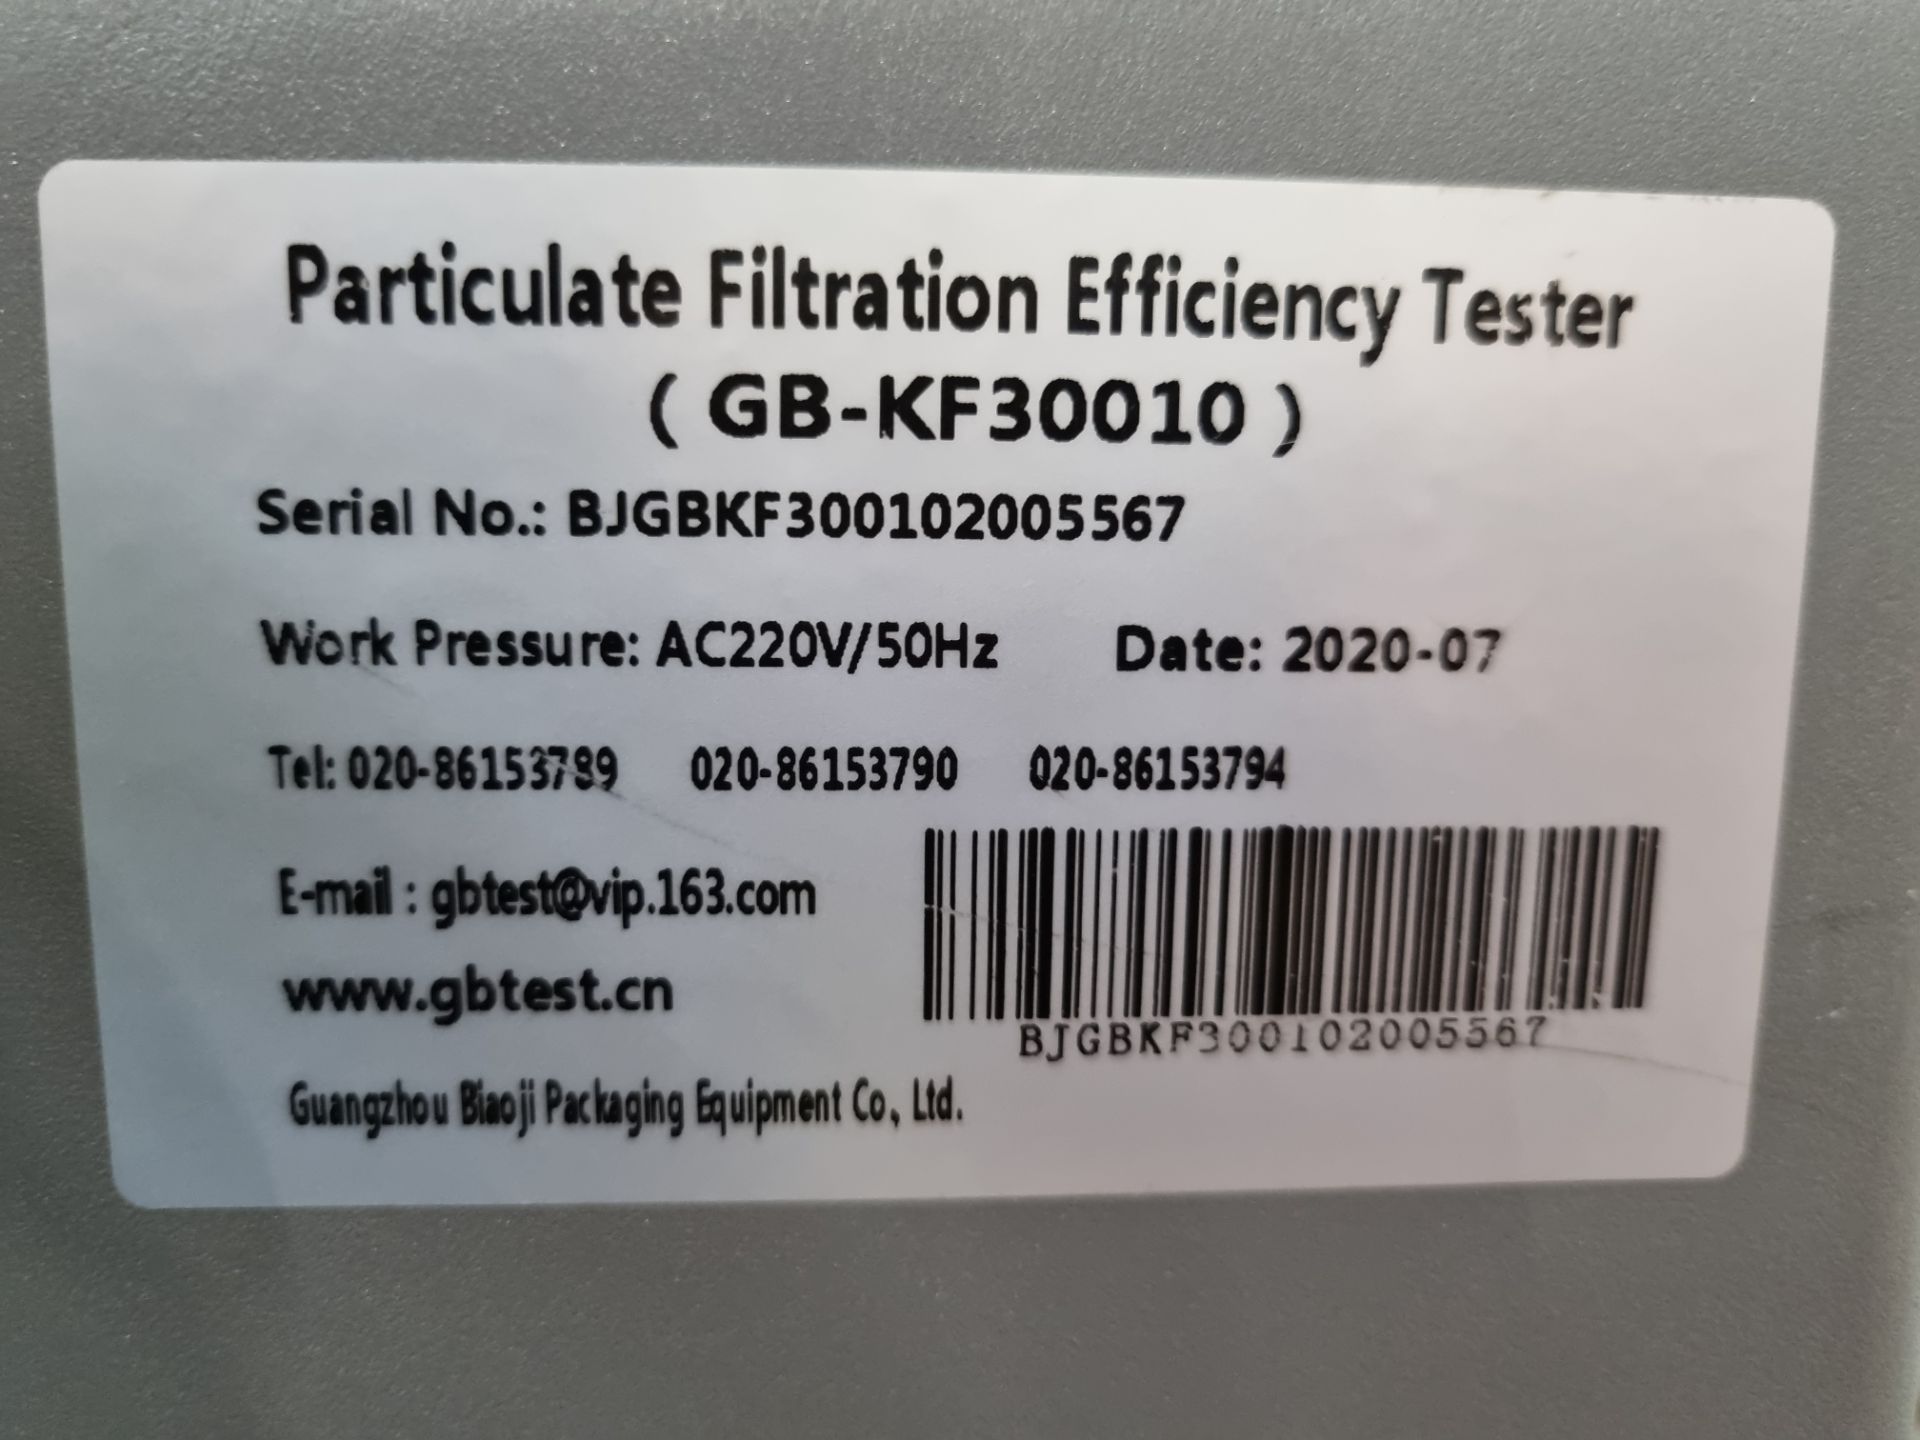 A Particulate Filtration Effieciency Tester - Image 4 of 4